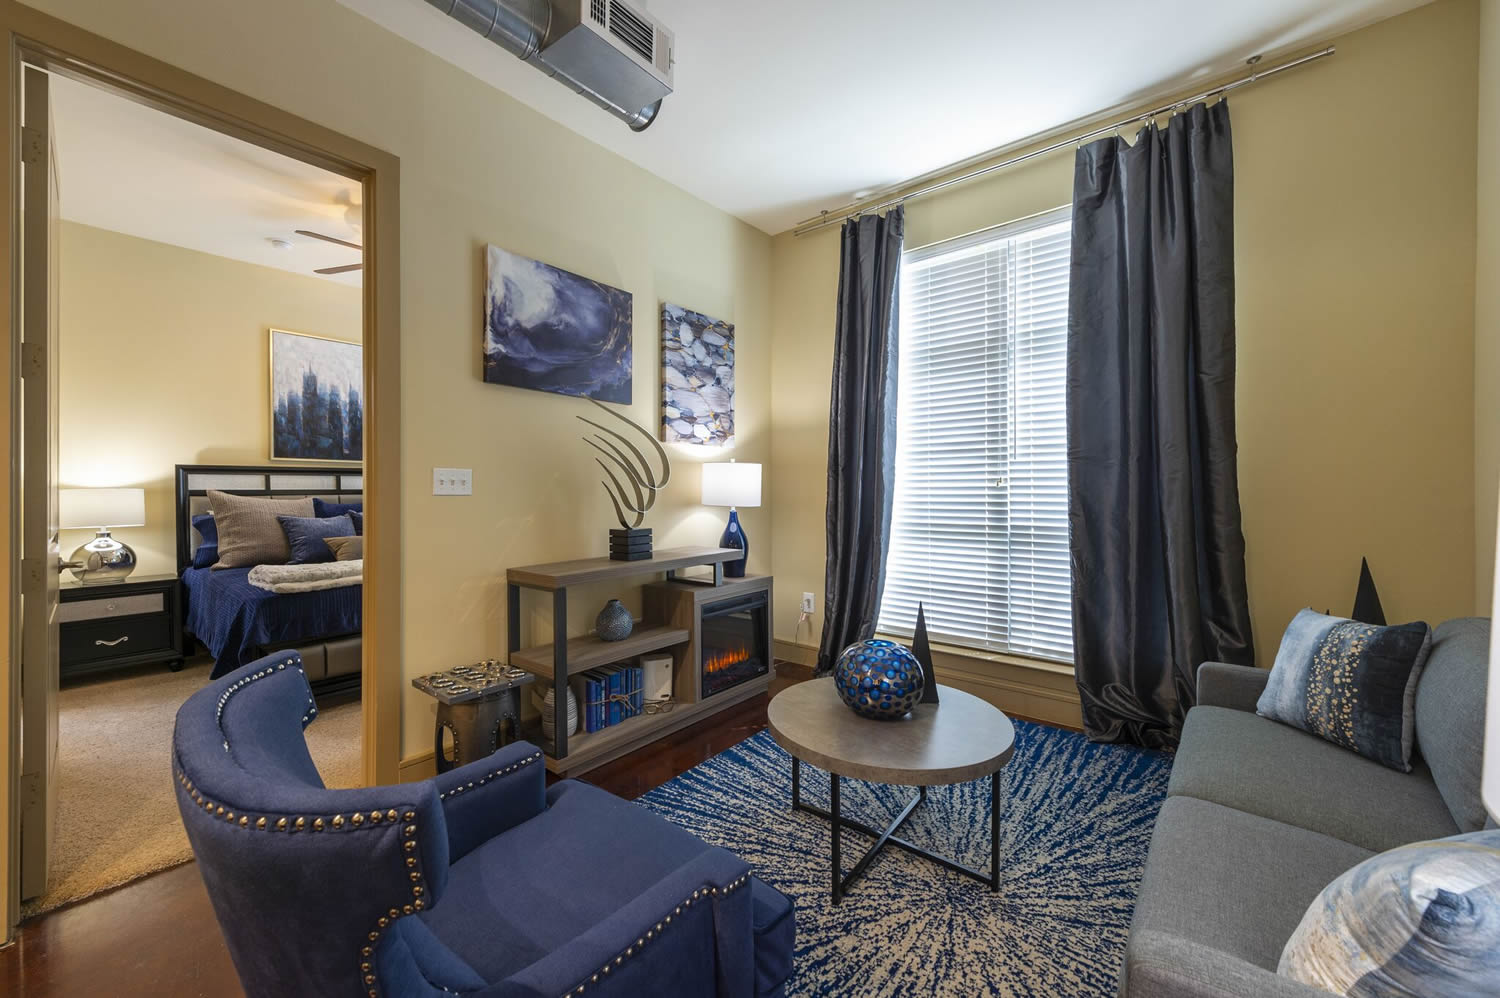 Apartments in Uptown Houston, Galleria Area An inviting living room with a stylish blue couch and a soft blue rug. Perfect for apartments in Uptown Houston or the Galleria Area.